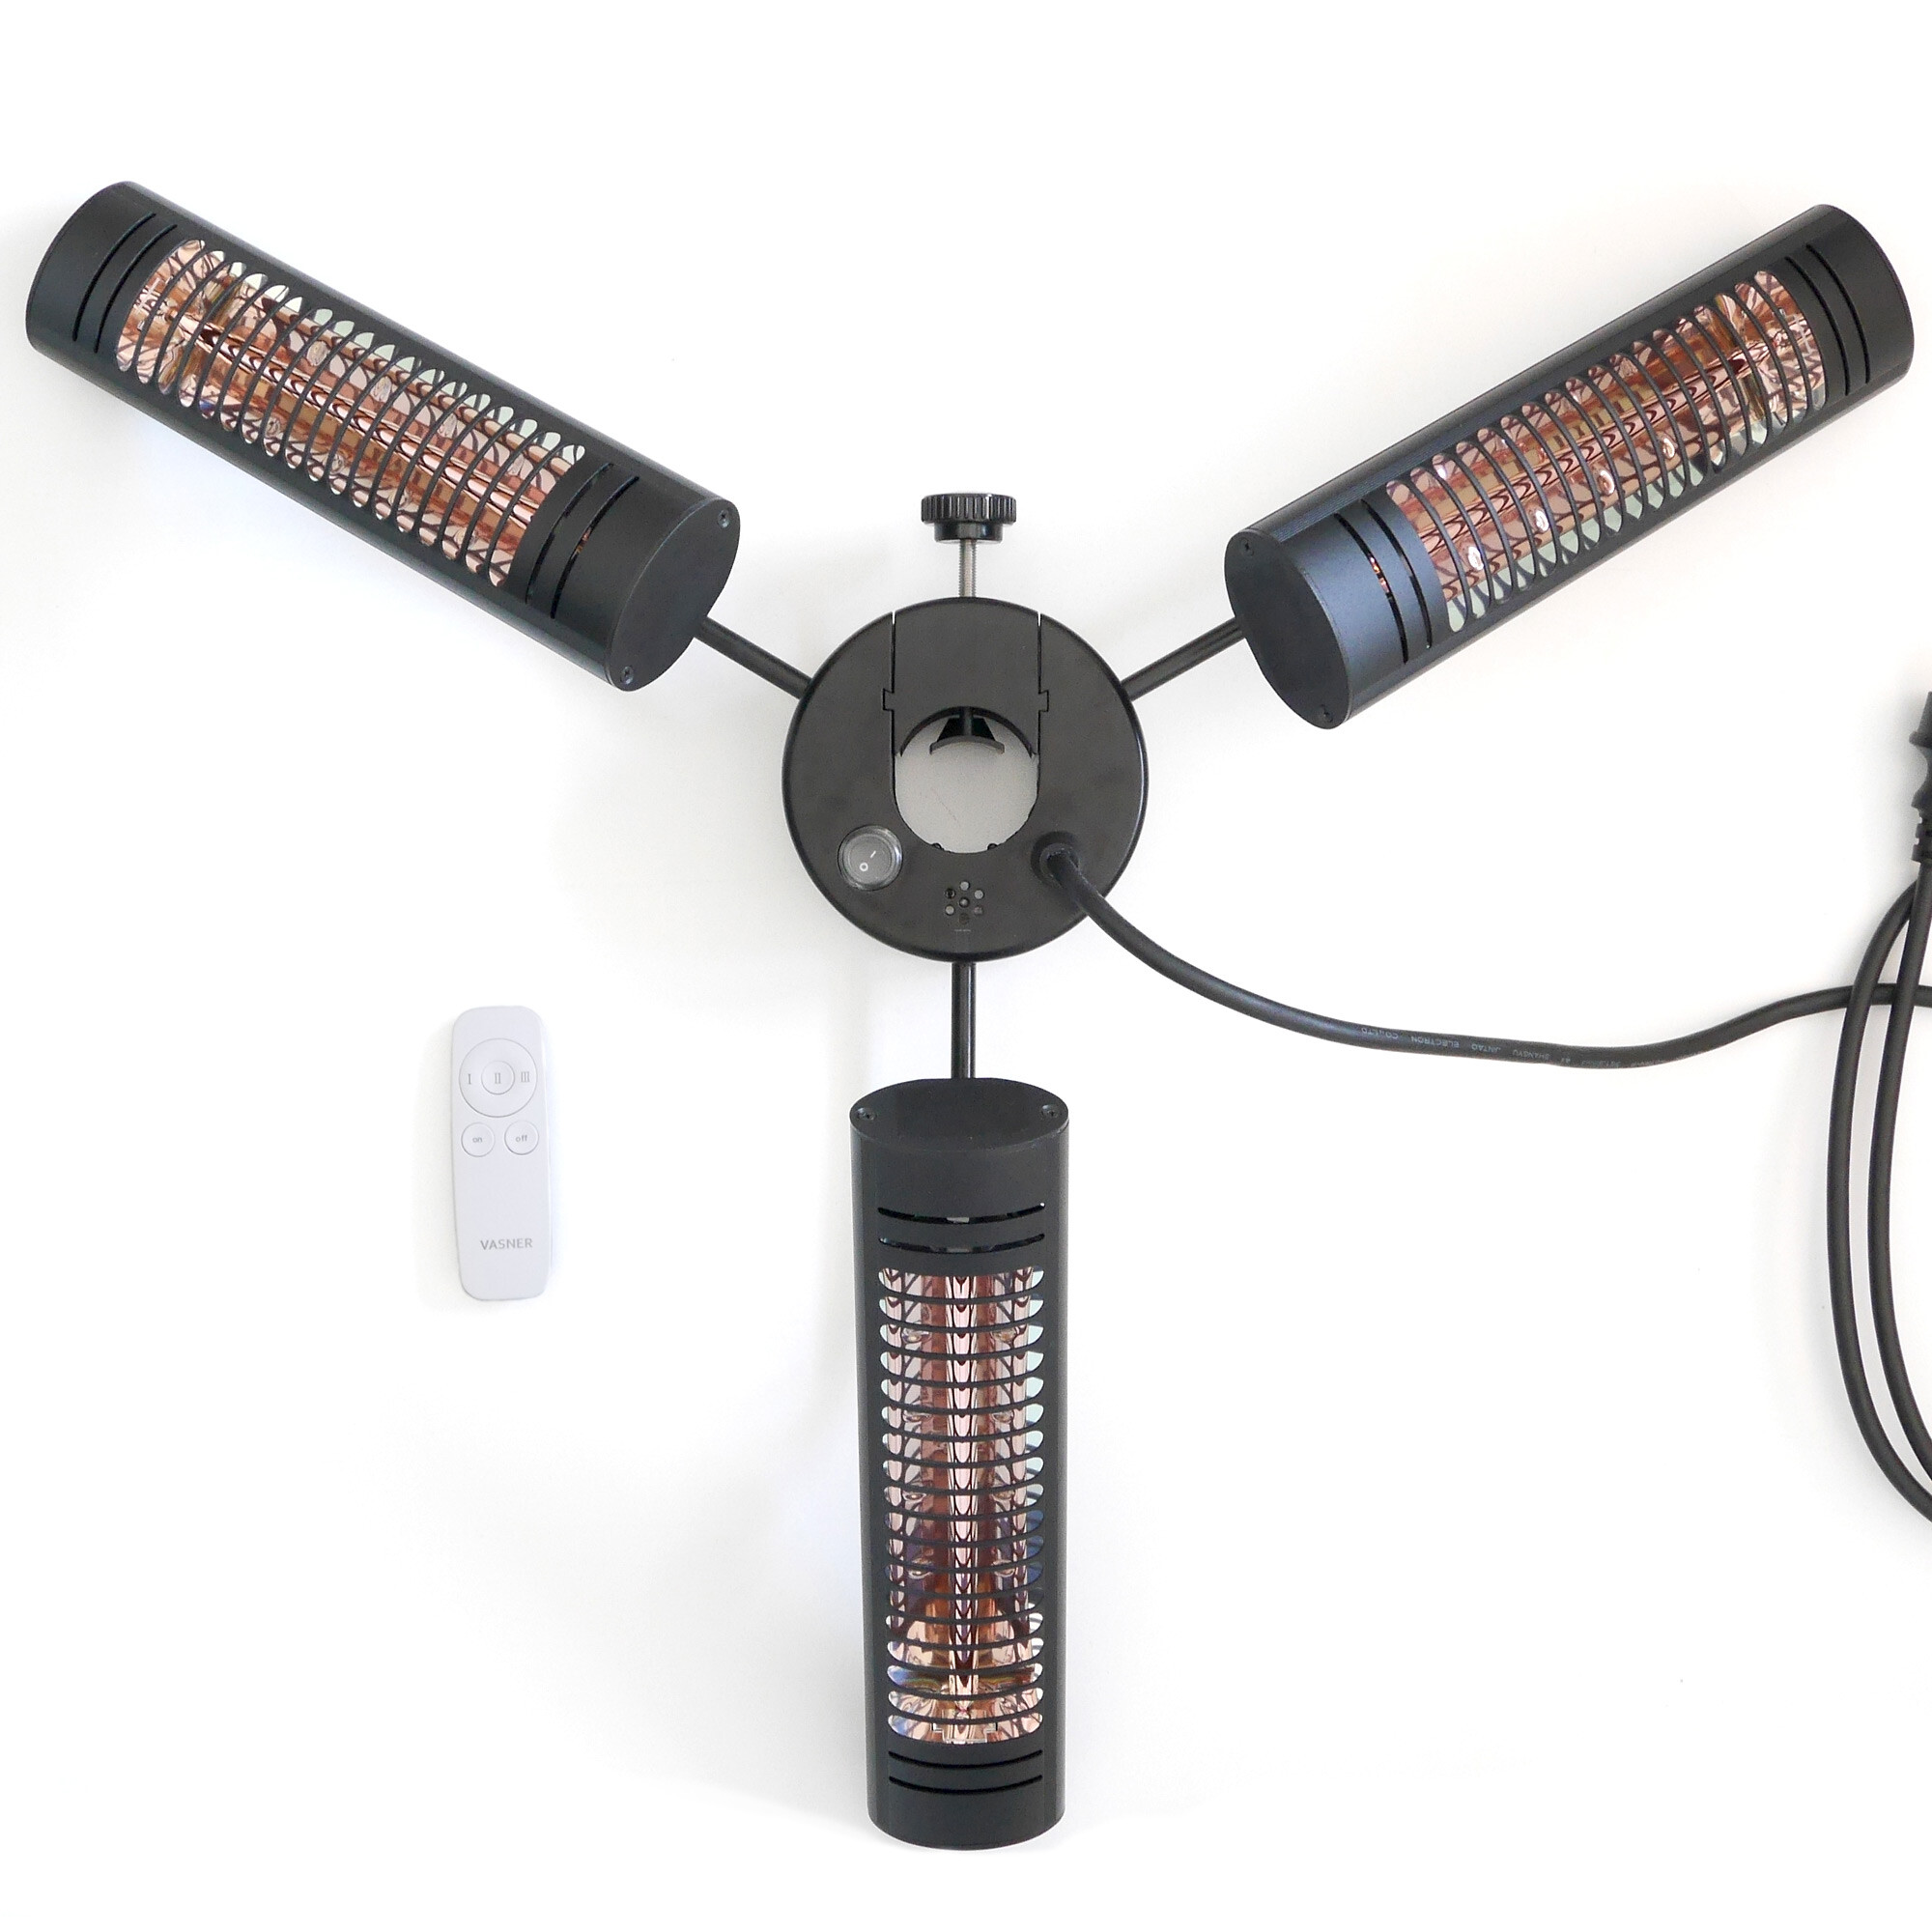 Parasol heater with remote control and power cord